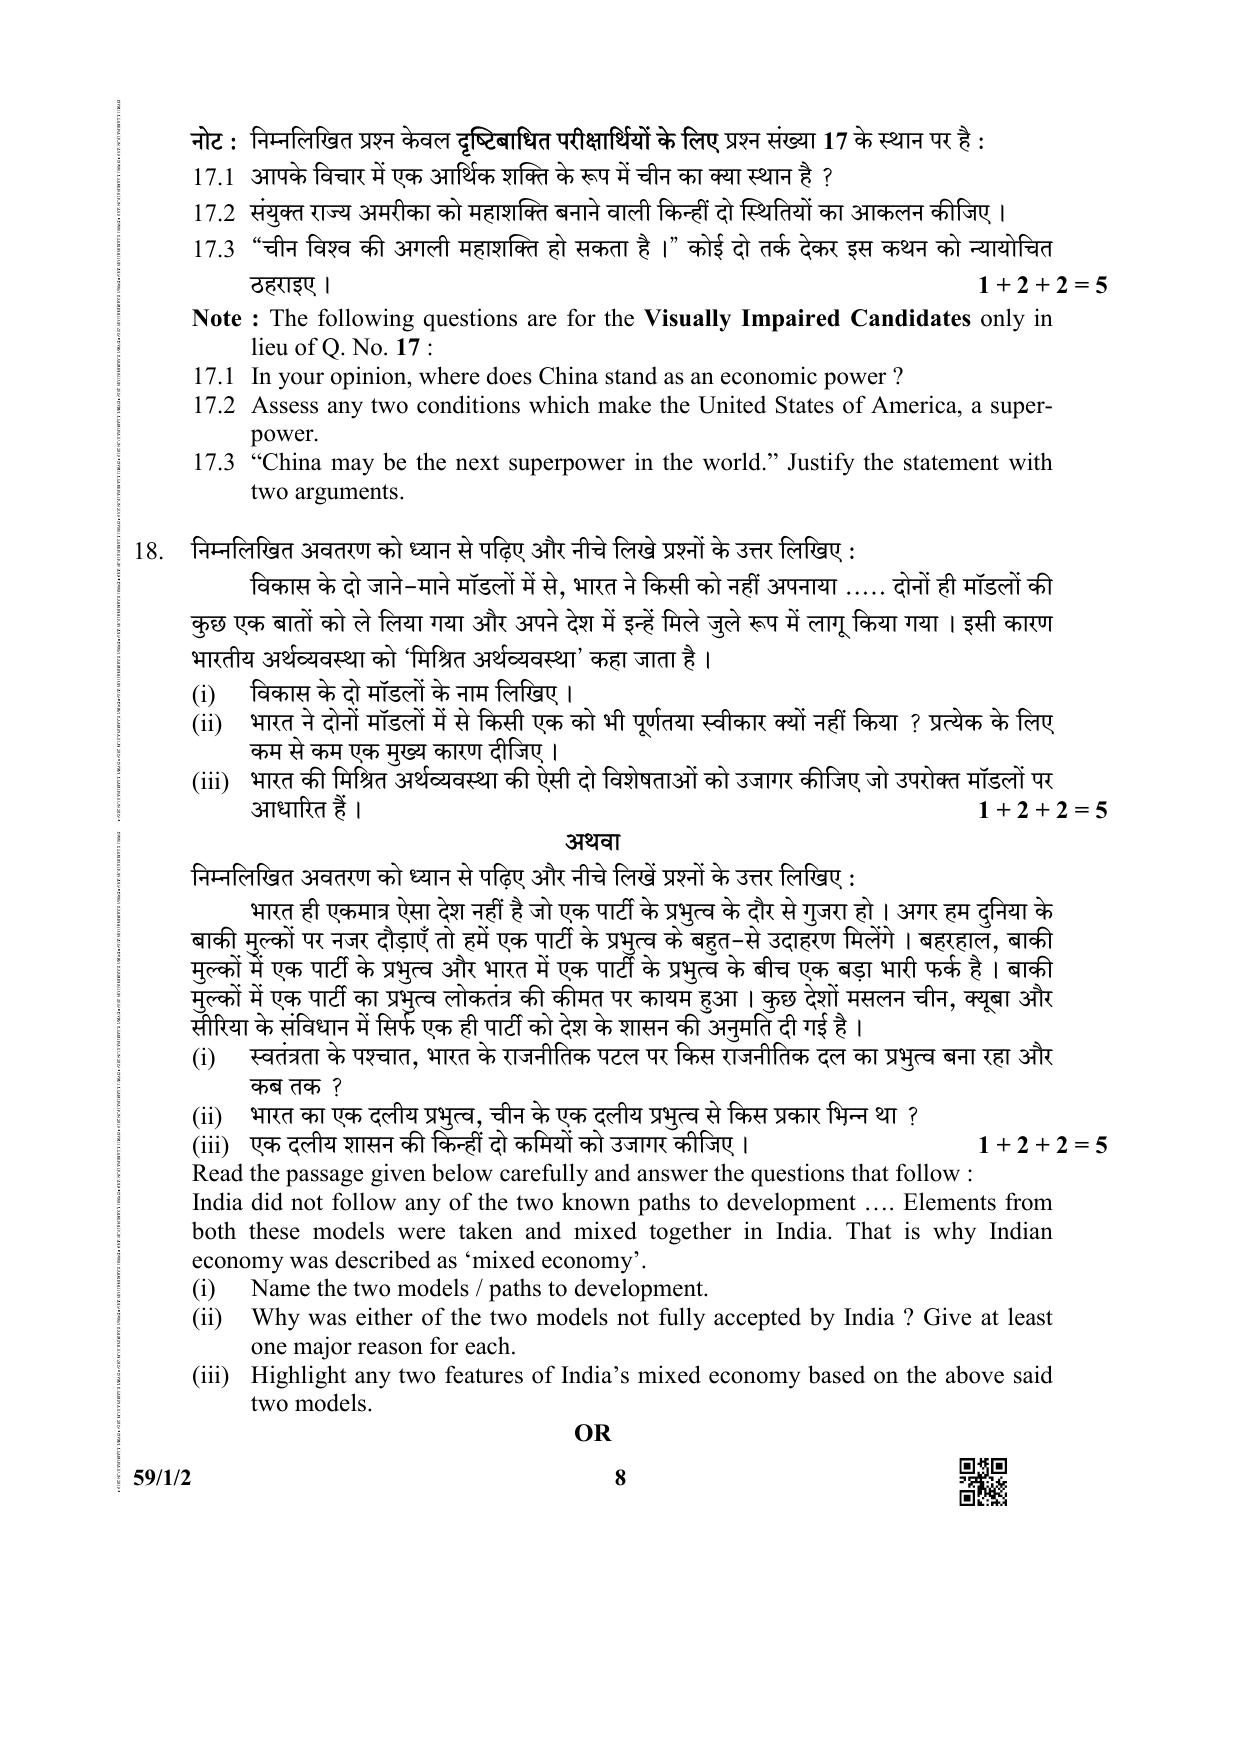 CBSE Class 12 59-1-2 (Political Science) 2019 Question Paper - Page 8